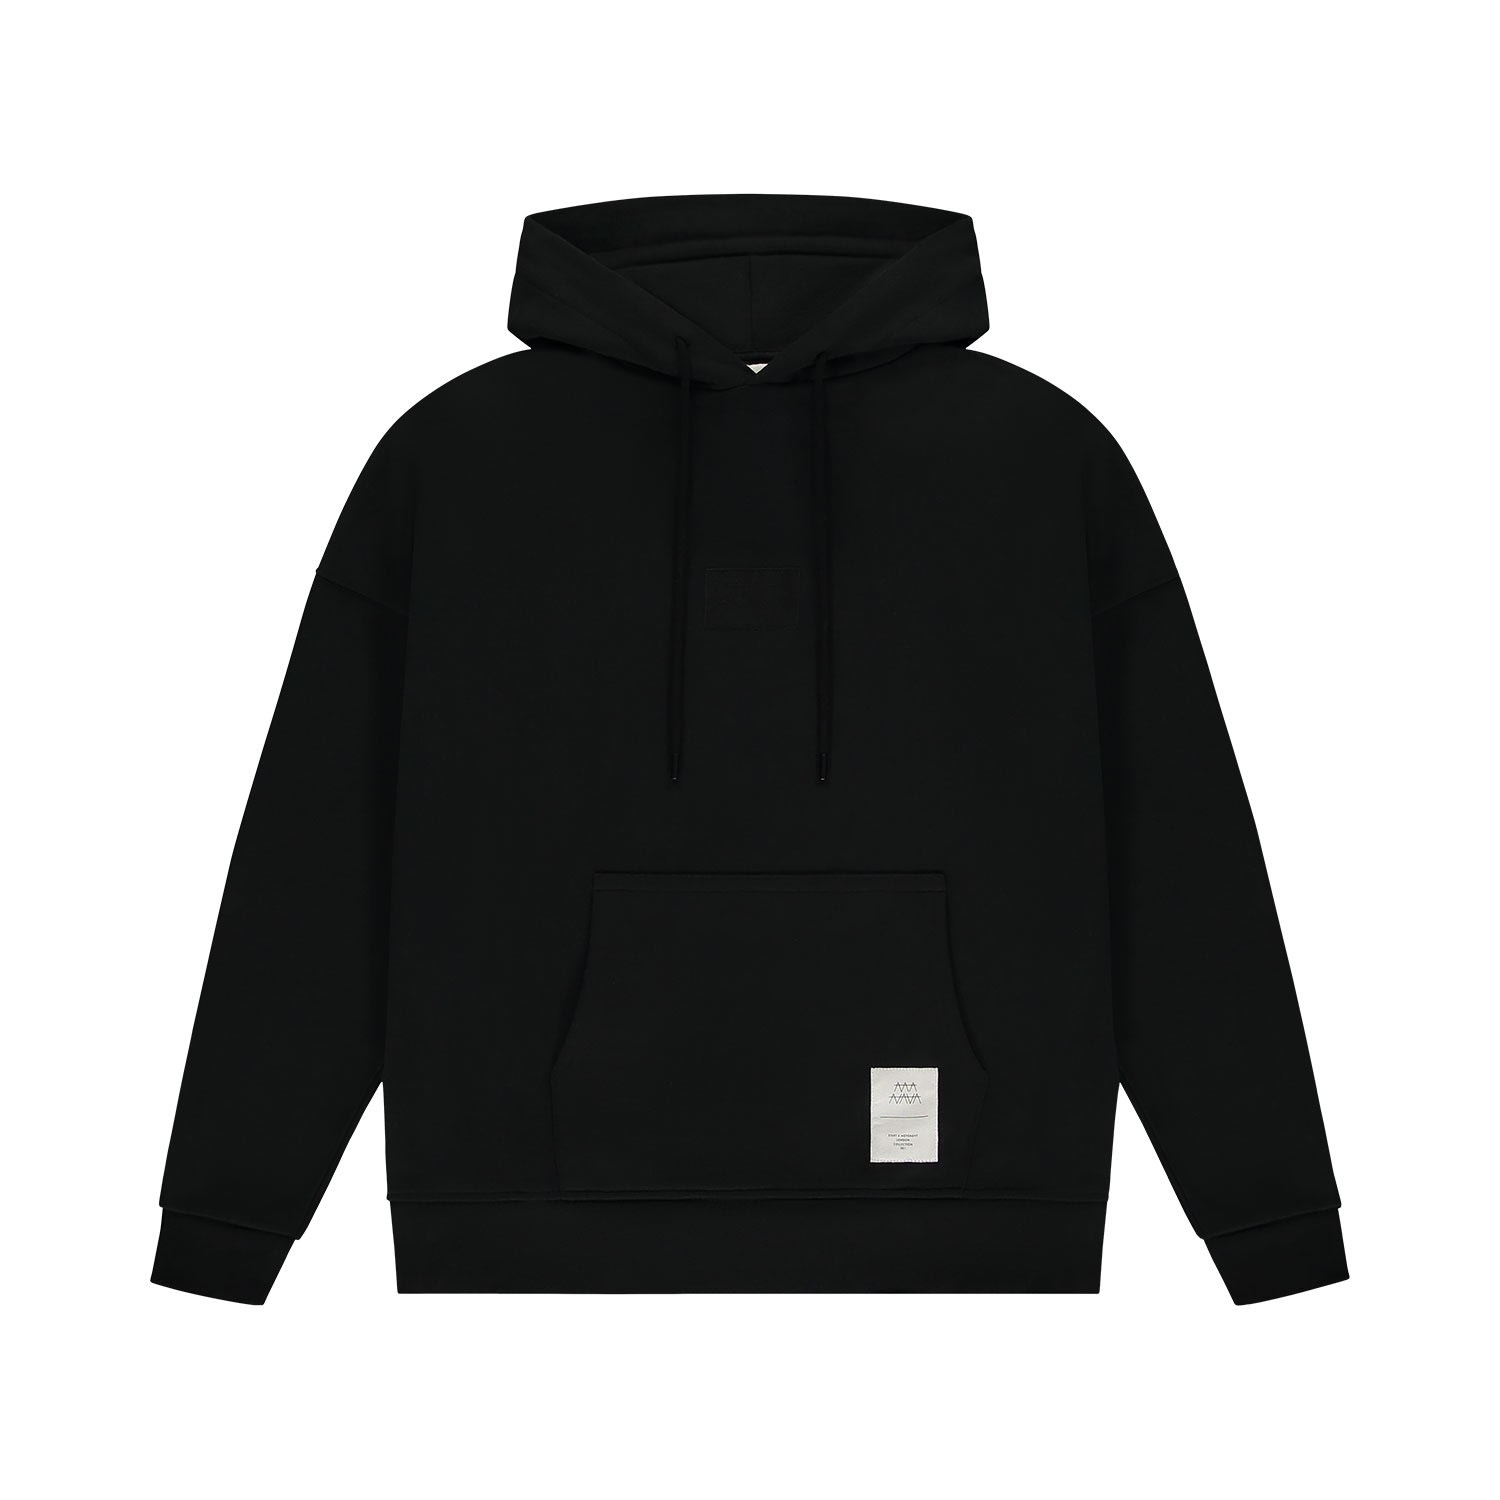 Men's Signature Hoodie - Washed Black Small MANAVA